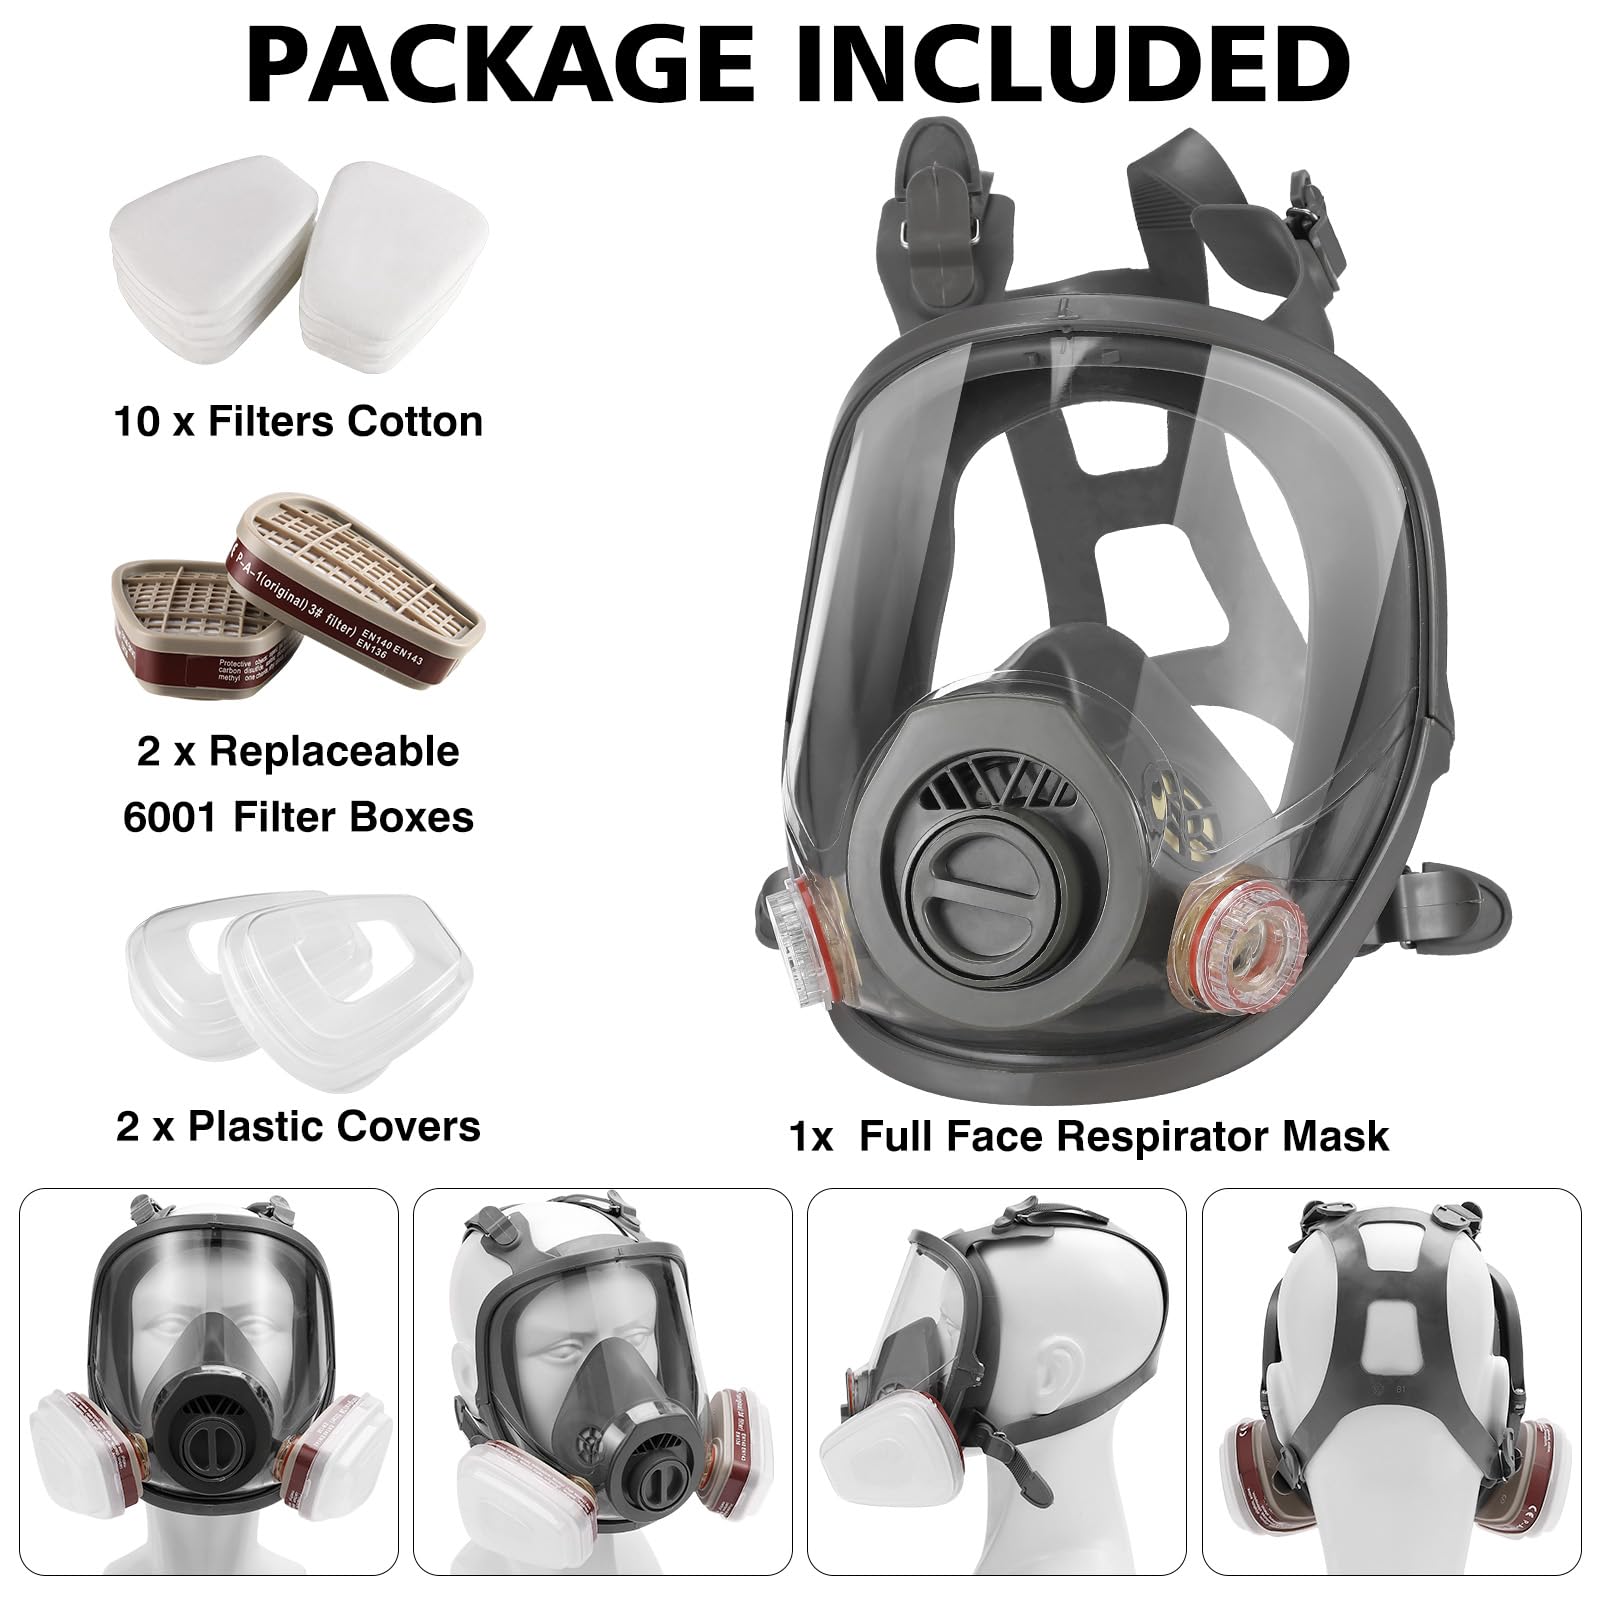 Reusable Full Face Gas Respirator Mask - Gas Masks with Activated Carbon Filter Against Gases/Dust/Organic Vapor/Fume